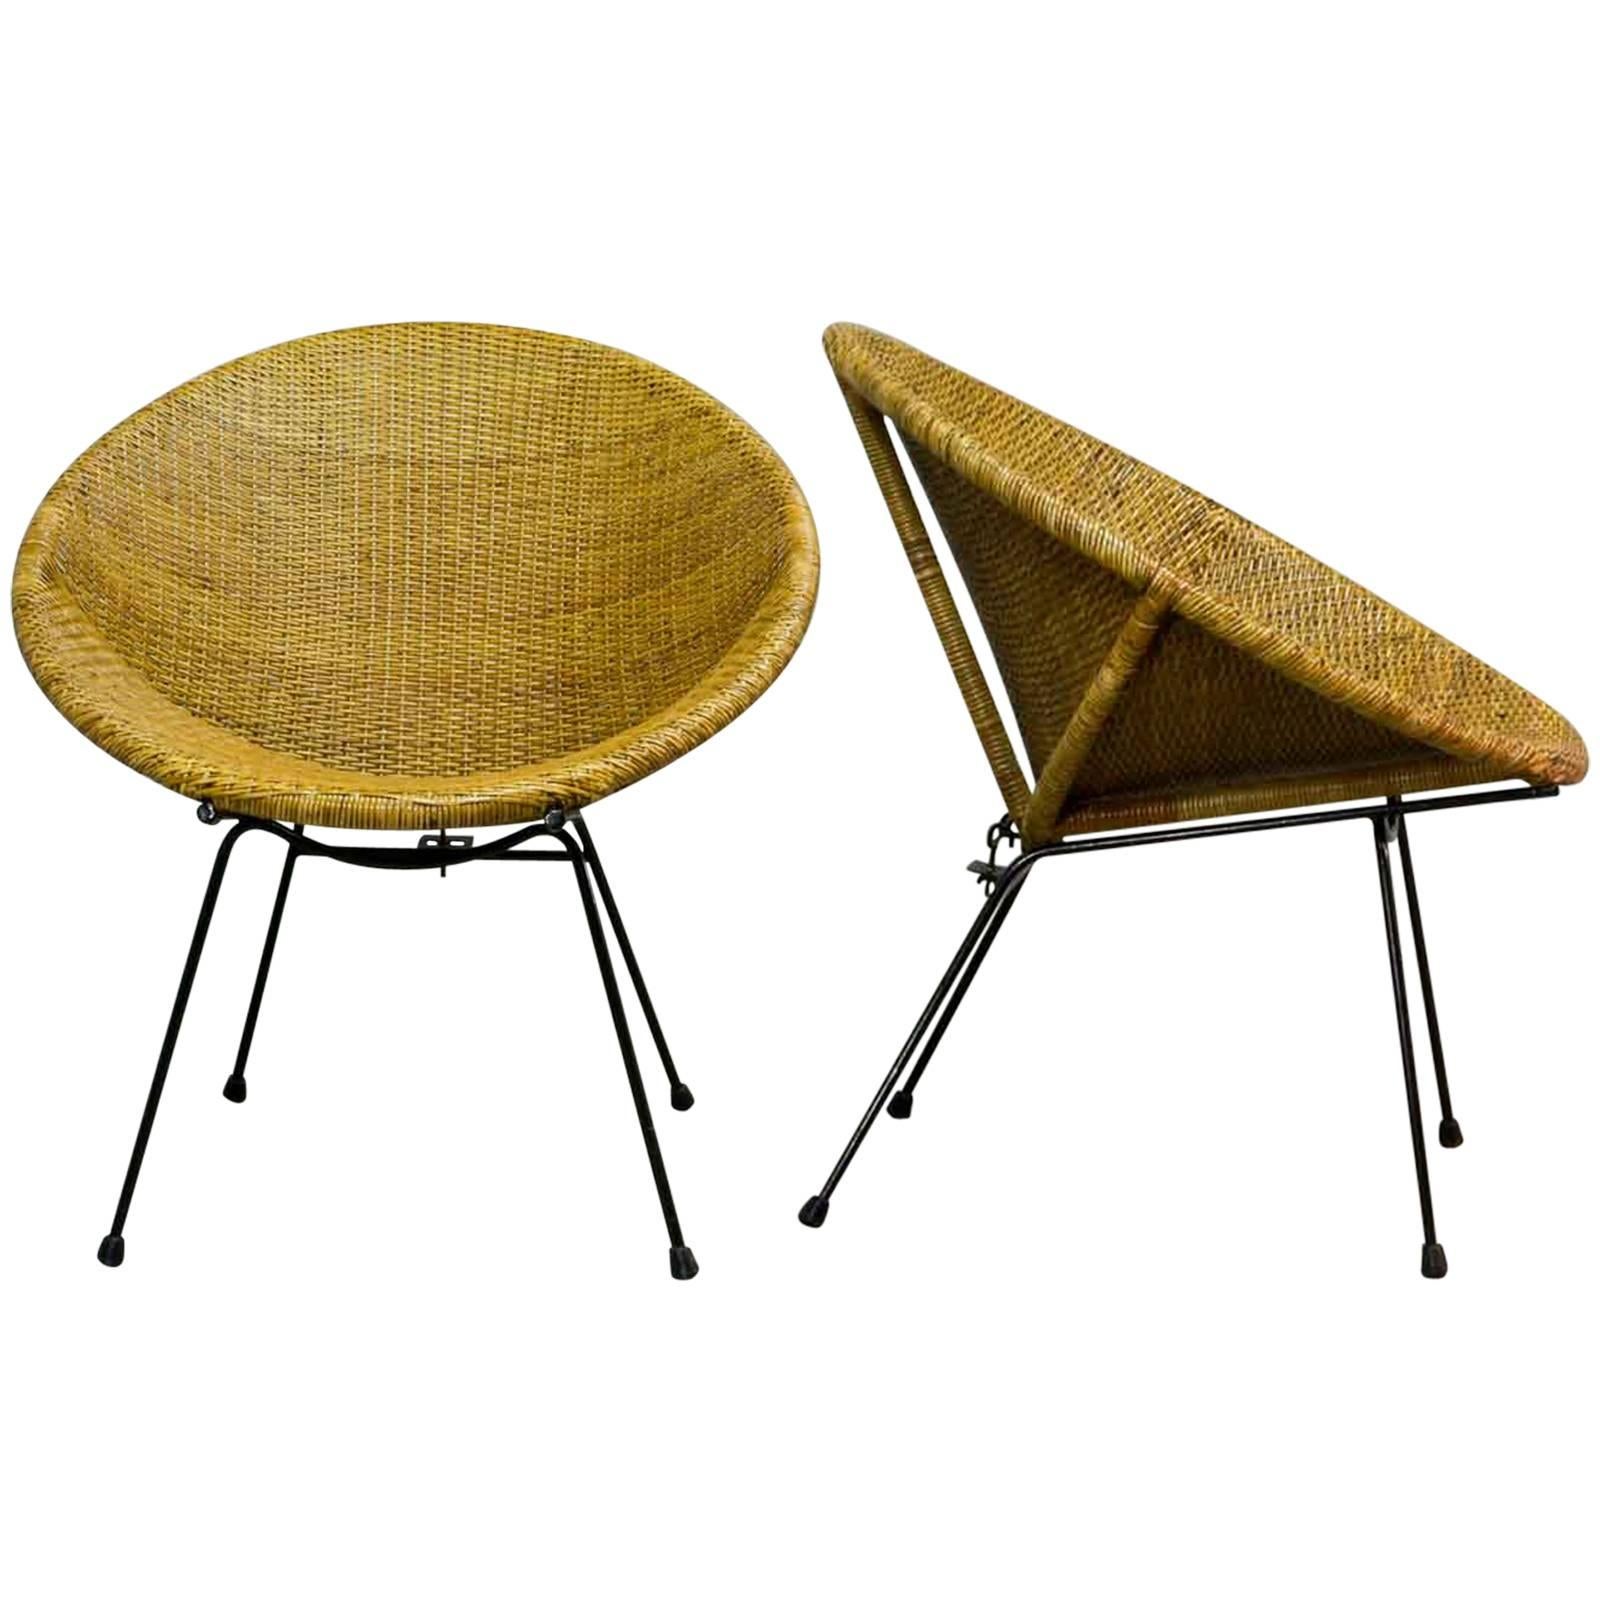 Stylish Pair of 1950 Circle Shaped Rattan Cocktail Chairs by Dirk Van Sliedregt